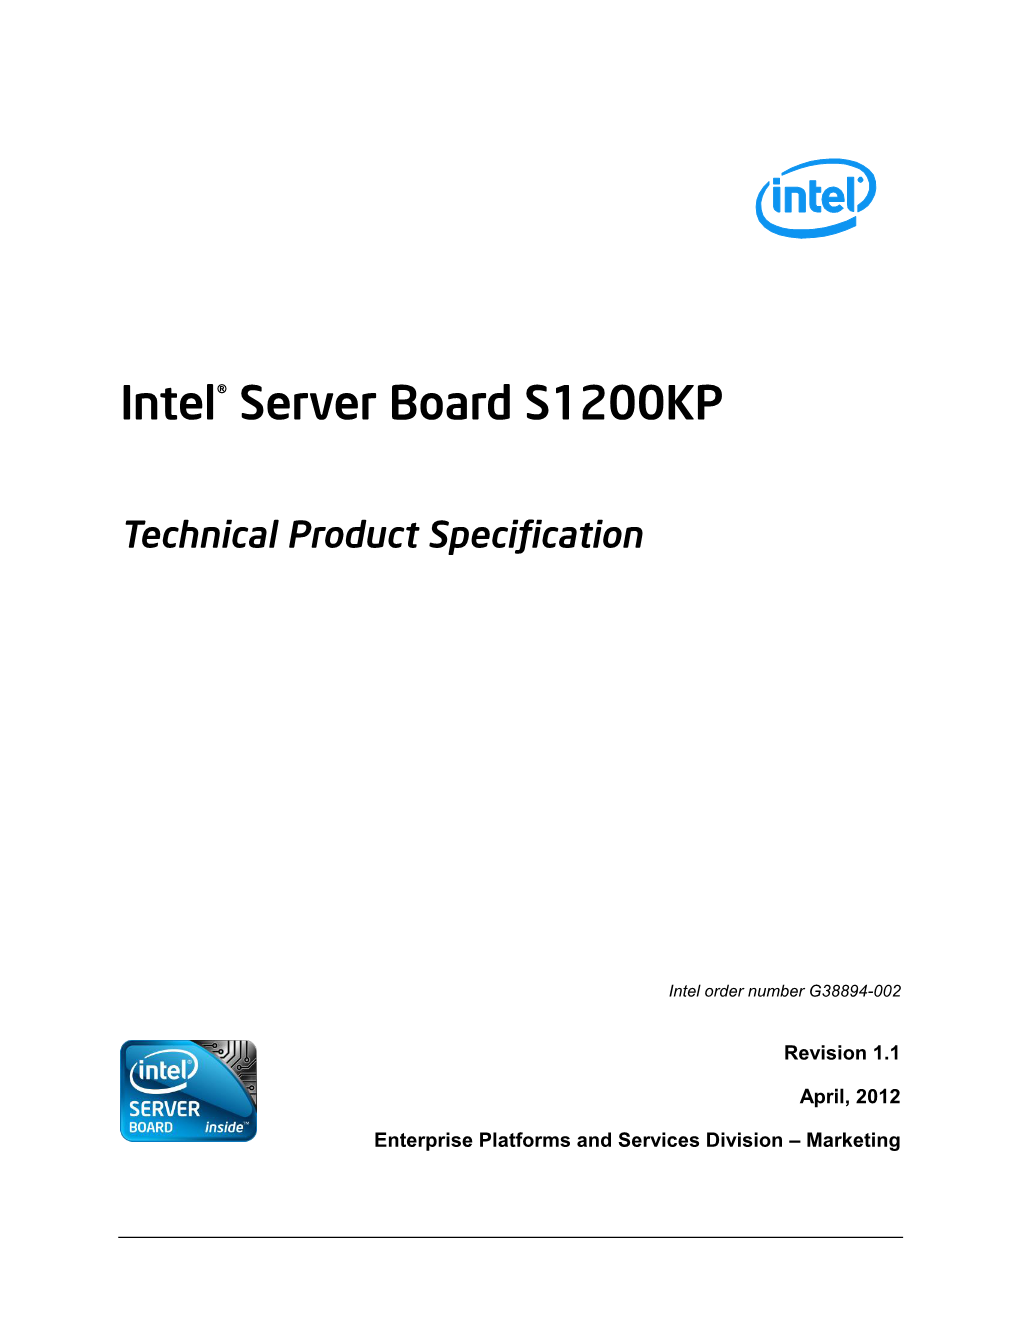 Intel® Server Board S1200KP Technical Product Specification